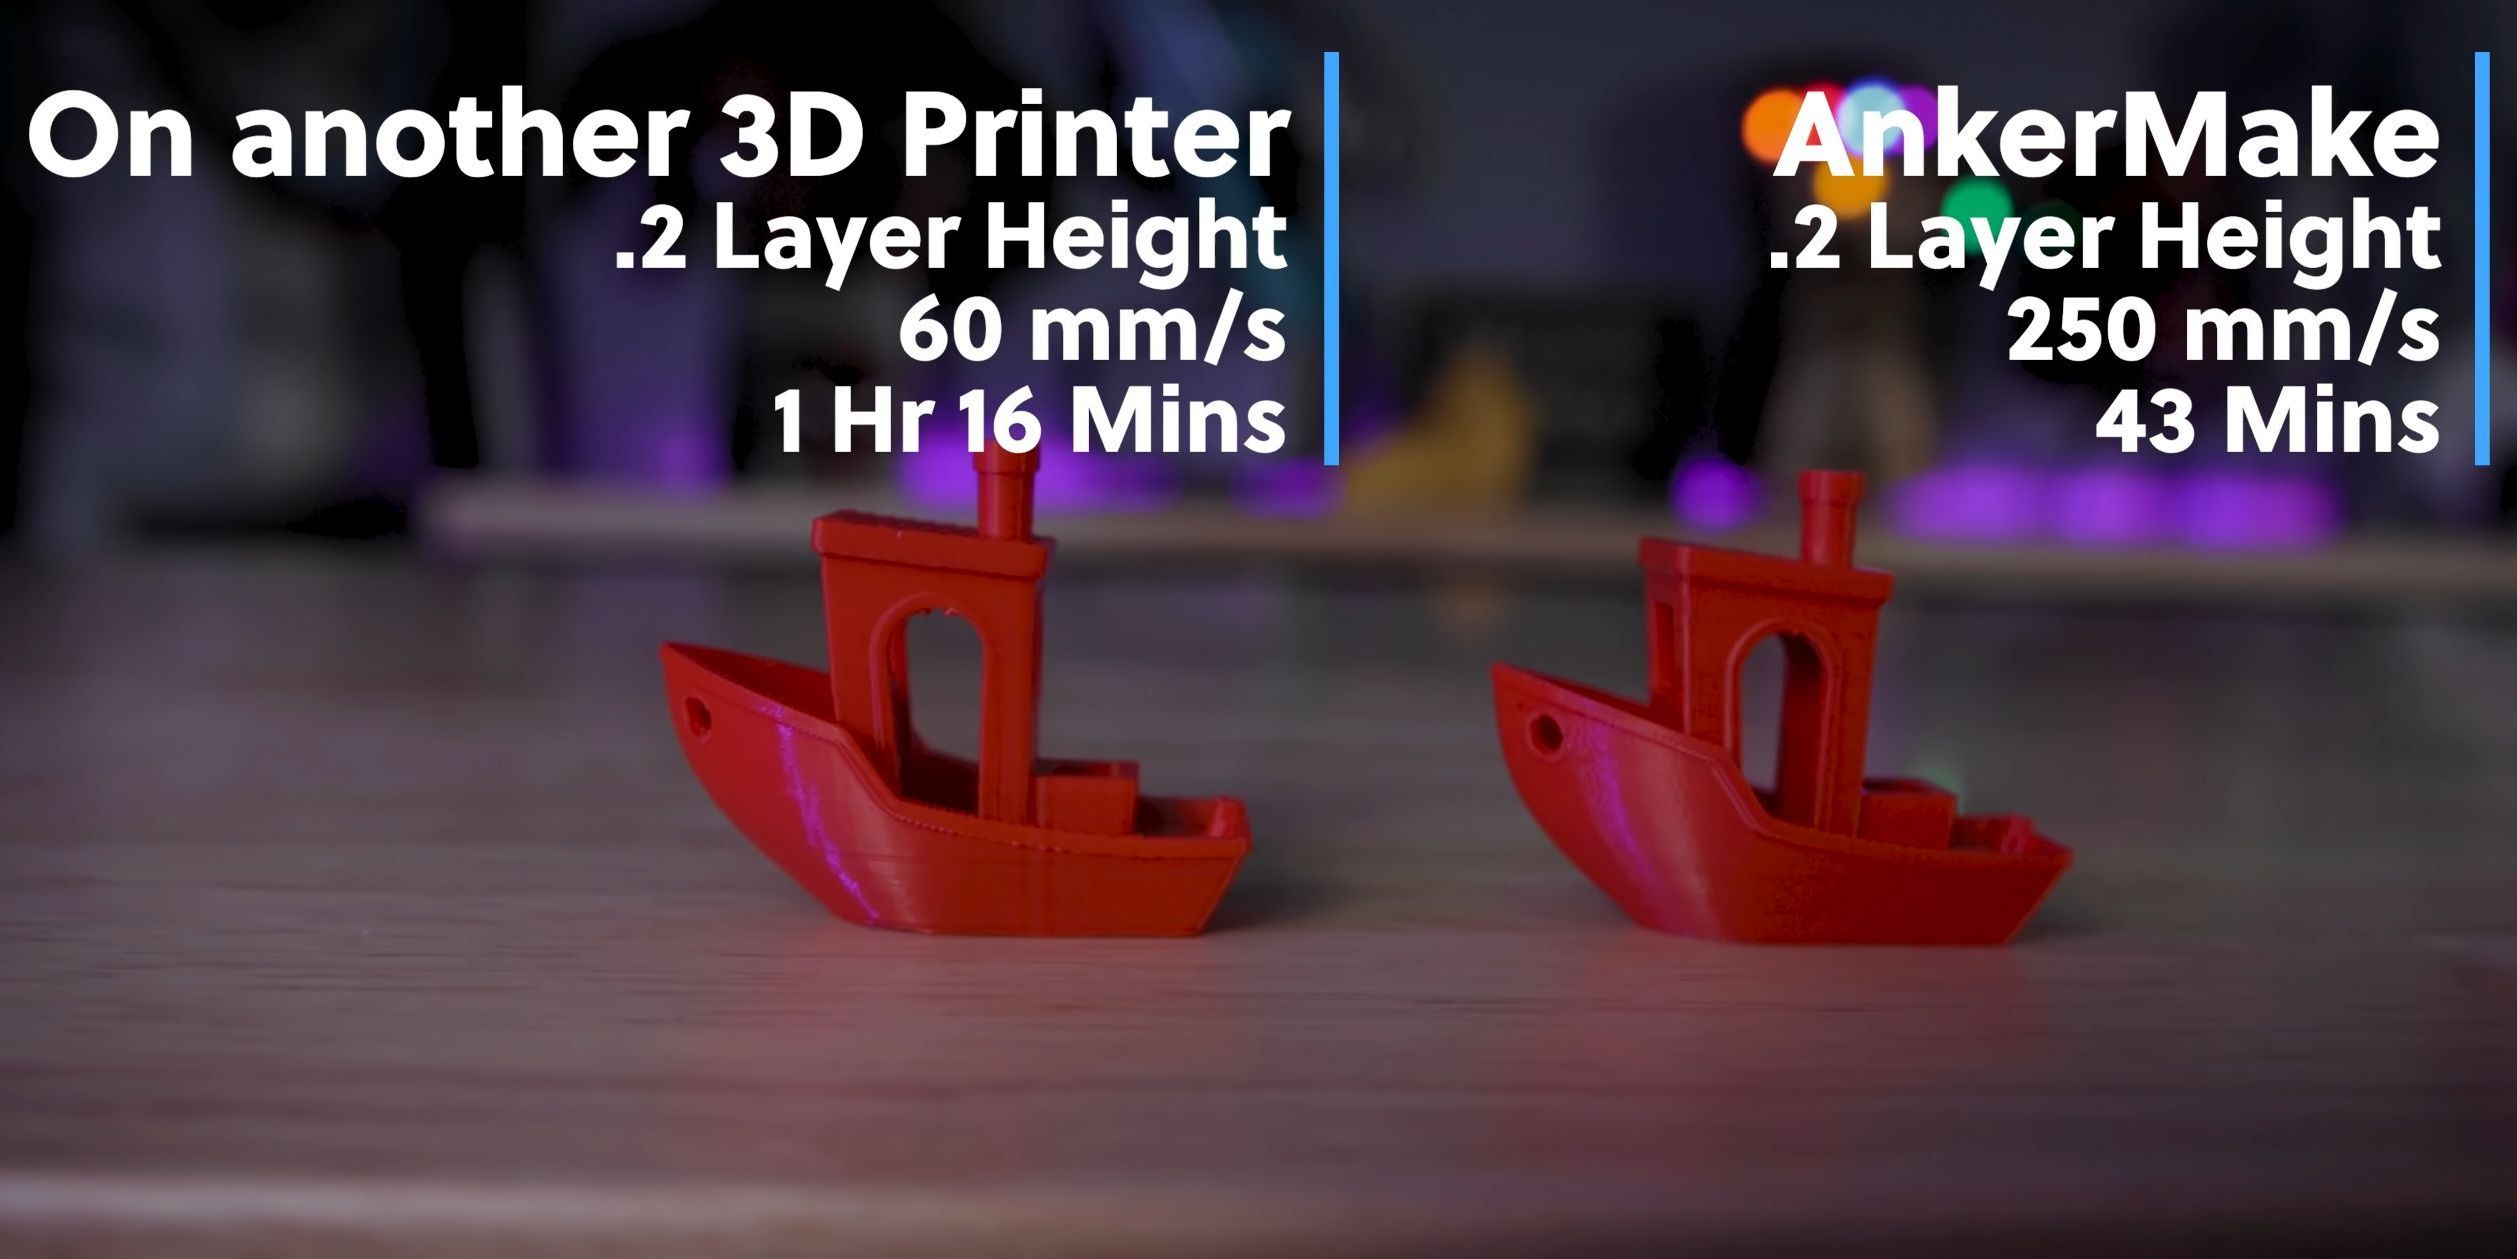 The AnkerMake M5 3D printer claims to be 5x faster than competitors.